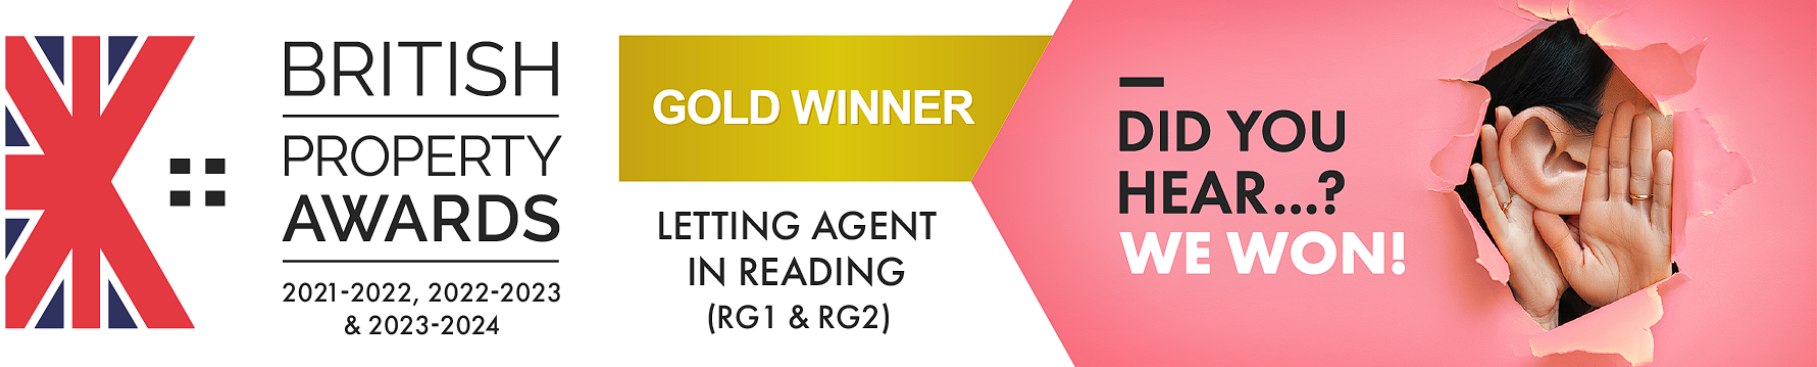 British Property Awards Gold Winner - Letting Agent in Reading (RG1 & RG2) 21/22, 22/23 & 23/24